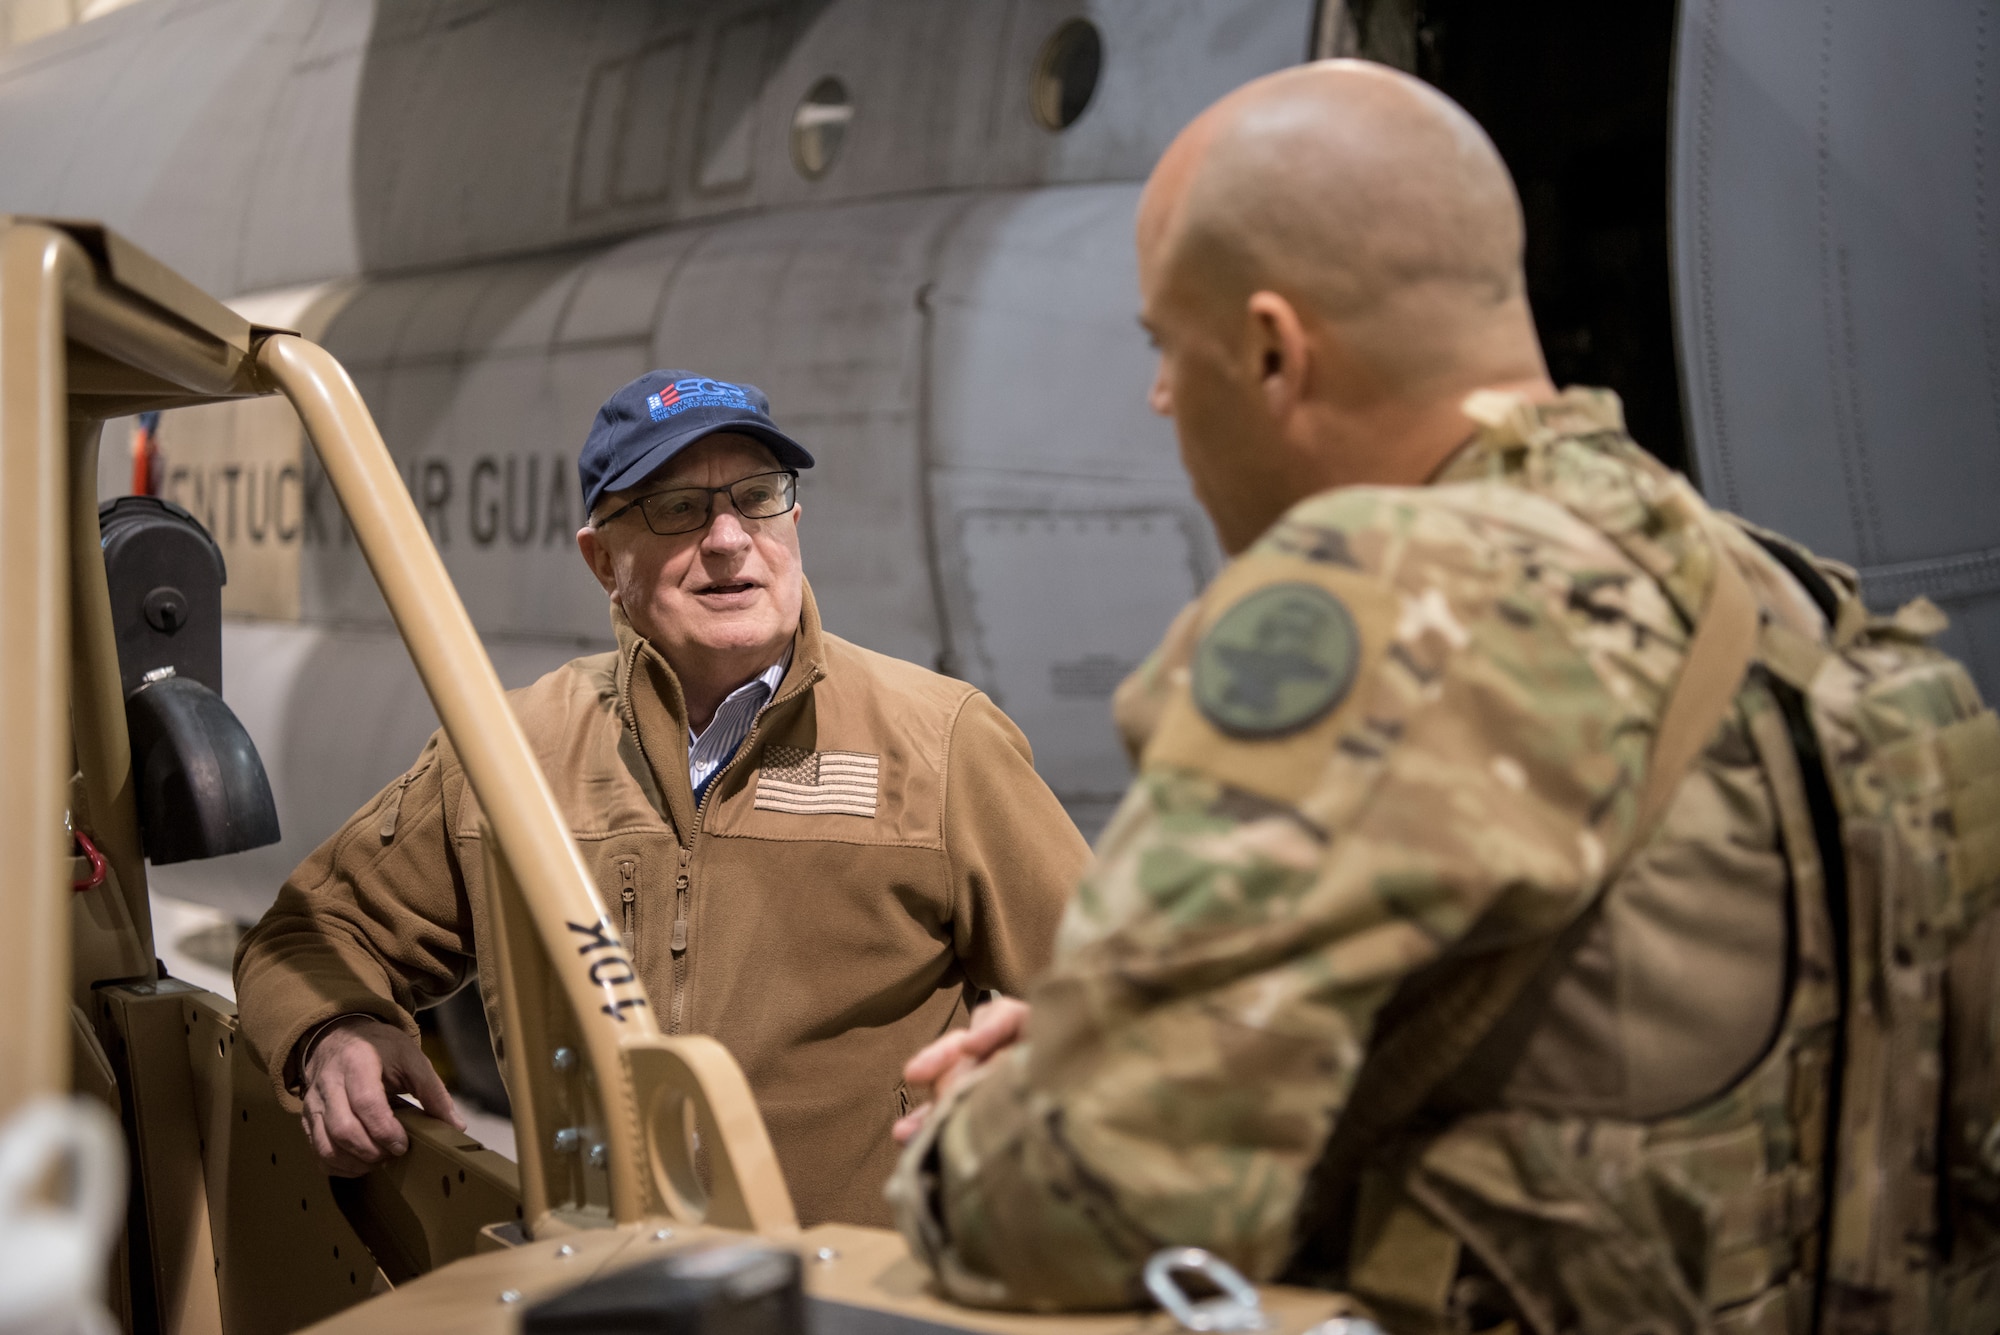 Philip Miller (left), state chairman for the Kentucky Committee for Employer Support of the Guard and Reserve, speaks with a member of the 123rd Special Tactics Squadron during a civilian employer tour of the Kentucky Air National Guard Base in Louisville, Ky., March 15, 2019. The employers were participating in an ESGR “Bosslift,” which enhances awareness and understanding between National Guardsmen and the civilian employers for whom they work when they’re not on duty. (U.S. Air National Guard photo by Staff Sgt. Joshua Horton)